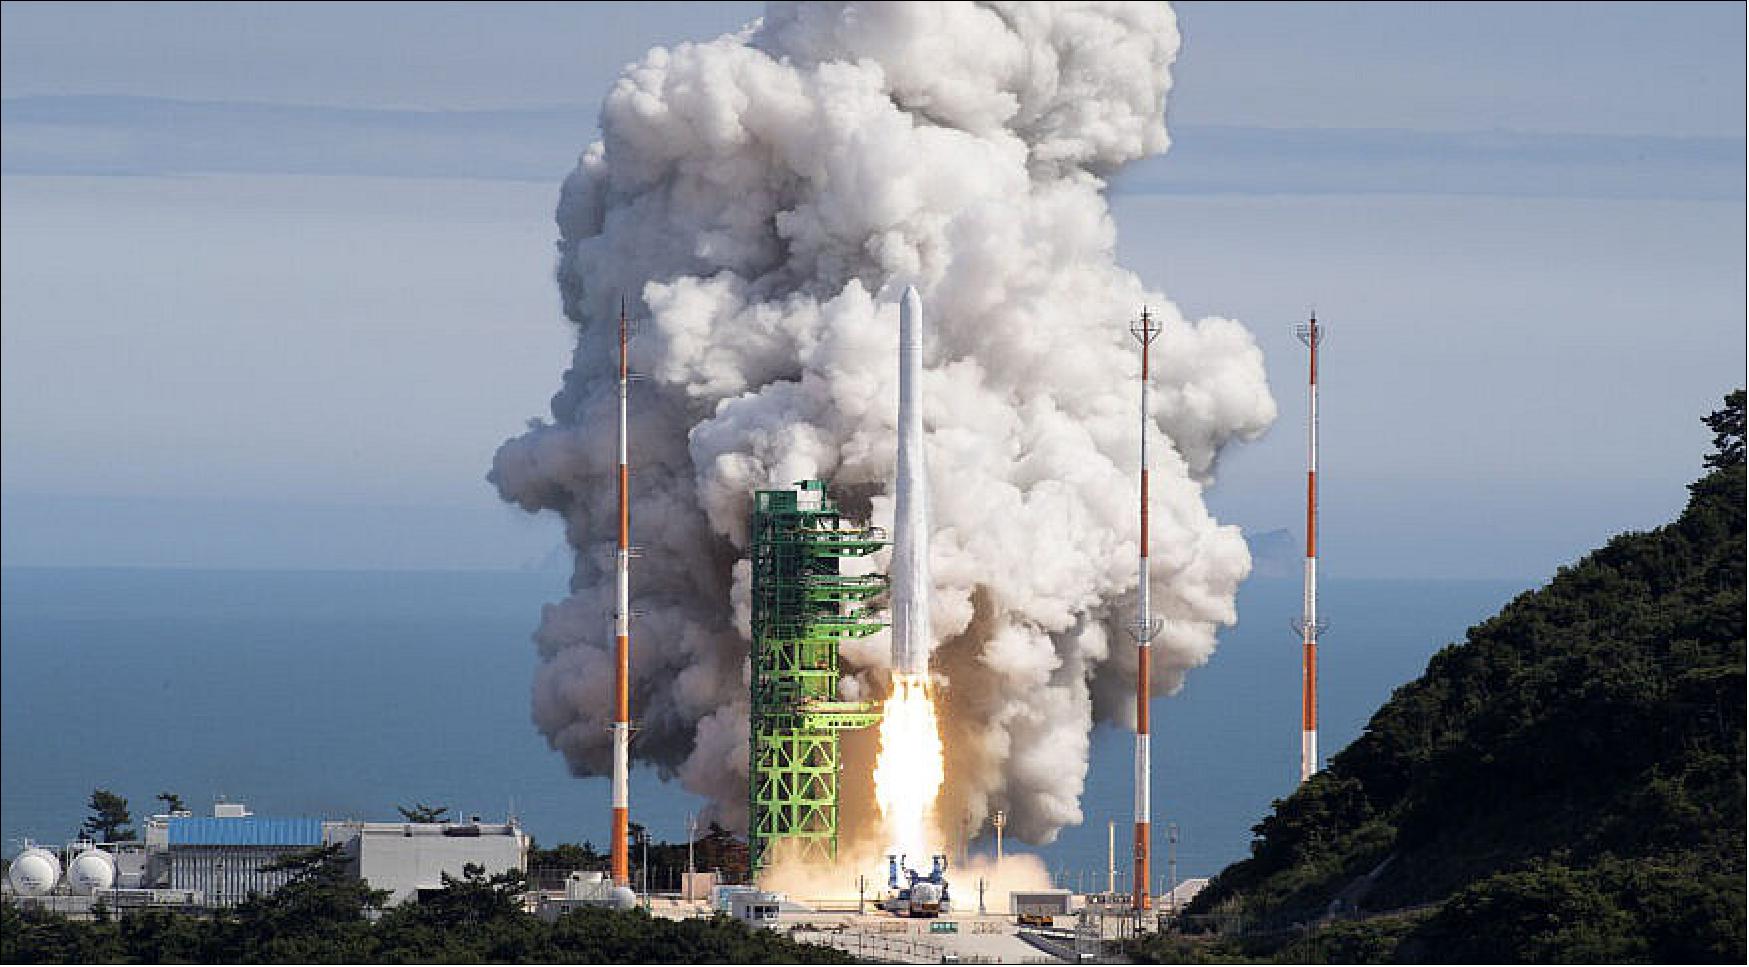 Figure 1: KSLV-2 blasts off from the launchpad at Naro Space Center in Goheung, Korea, on June 21, 2022 (image credit: Ministry of Science and ICT)